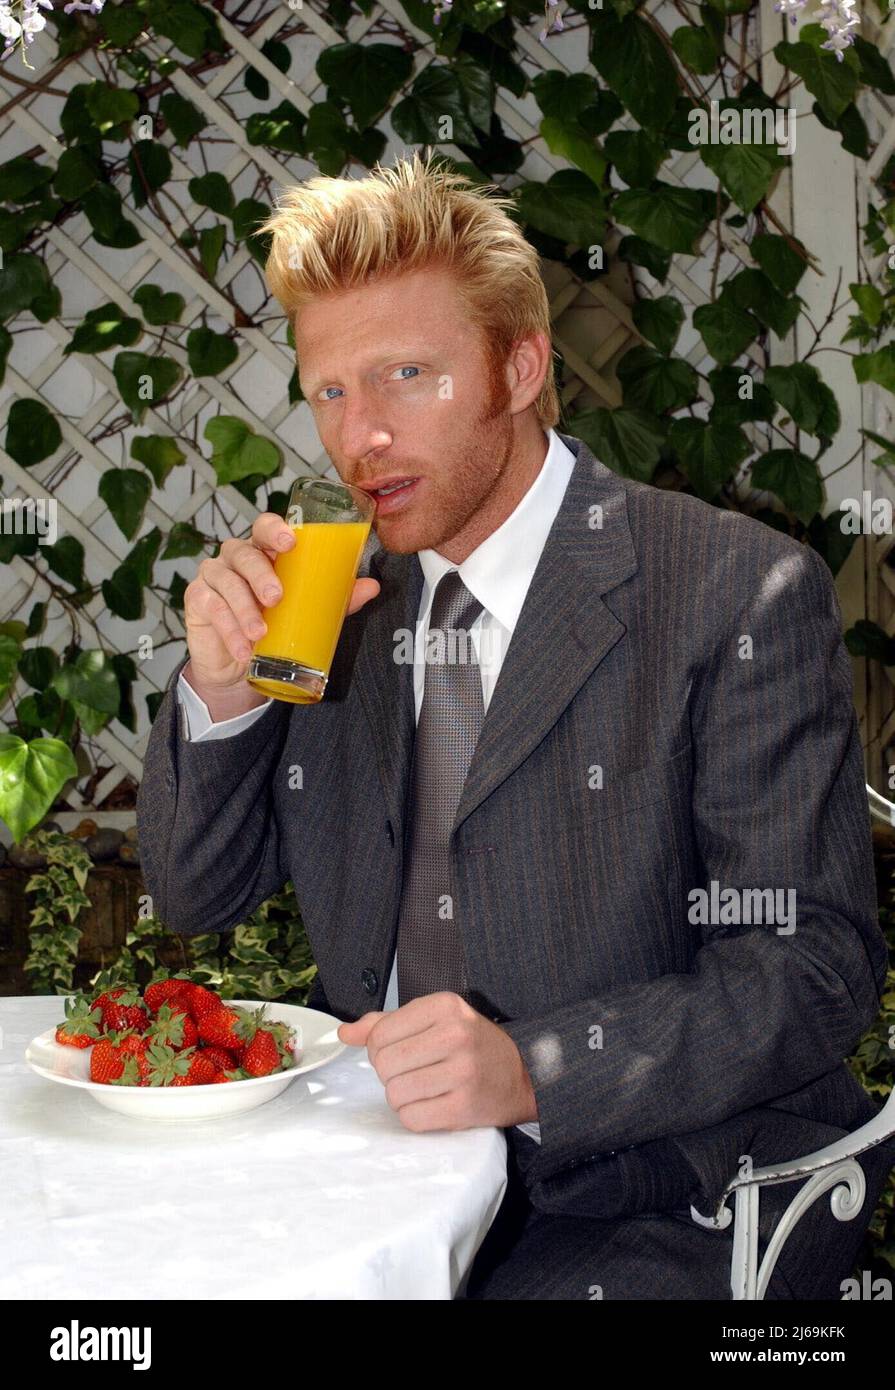 File photo dated 01-05-2002 of German tennis player Boris Becker. Three-time Wimbledon champion Boris Becker has been jailed for two-and-a-half years for hiding £2.5million worth of assets and loans to avoid paying his debts. Issue date: Friday April 29, 2022. Stock Photo